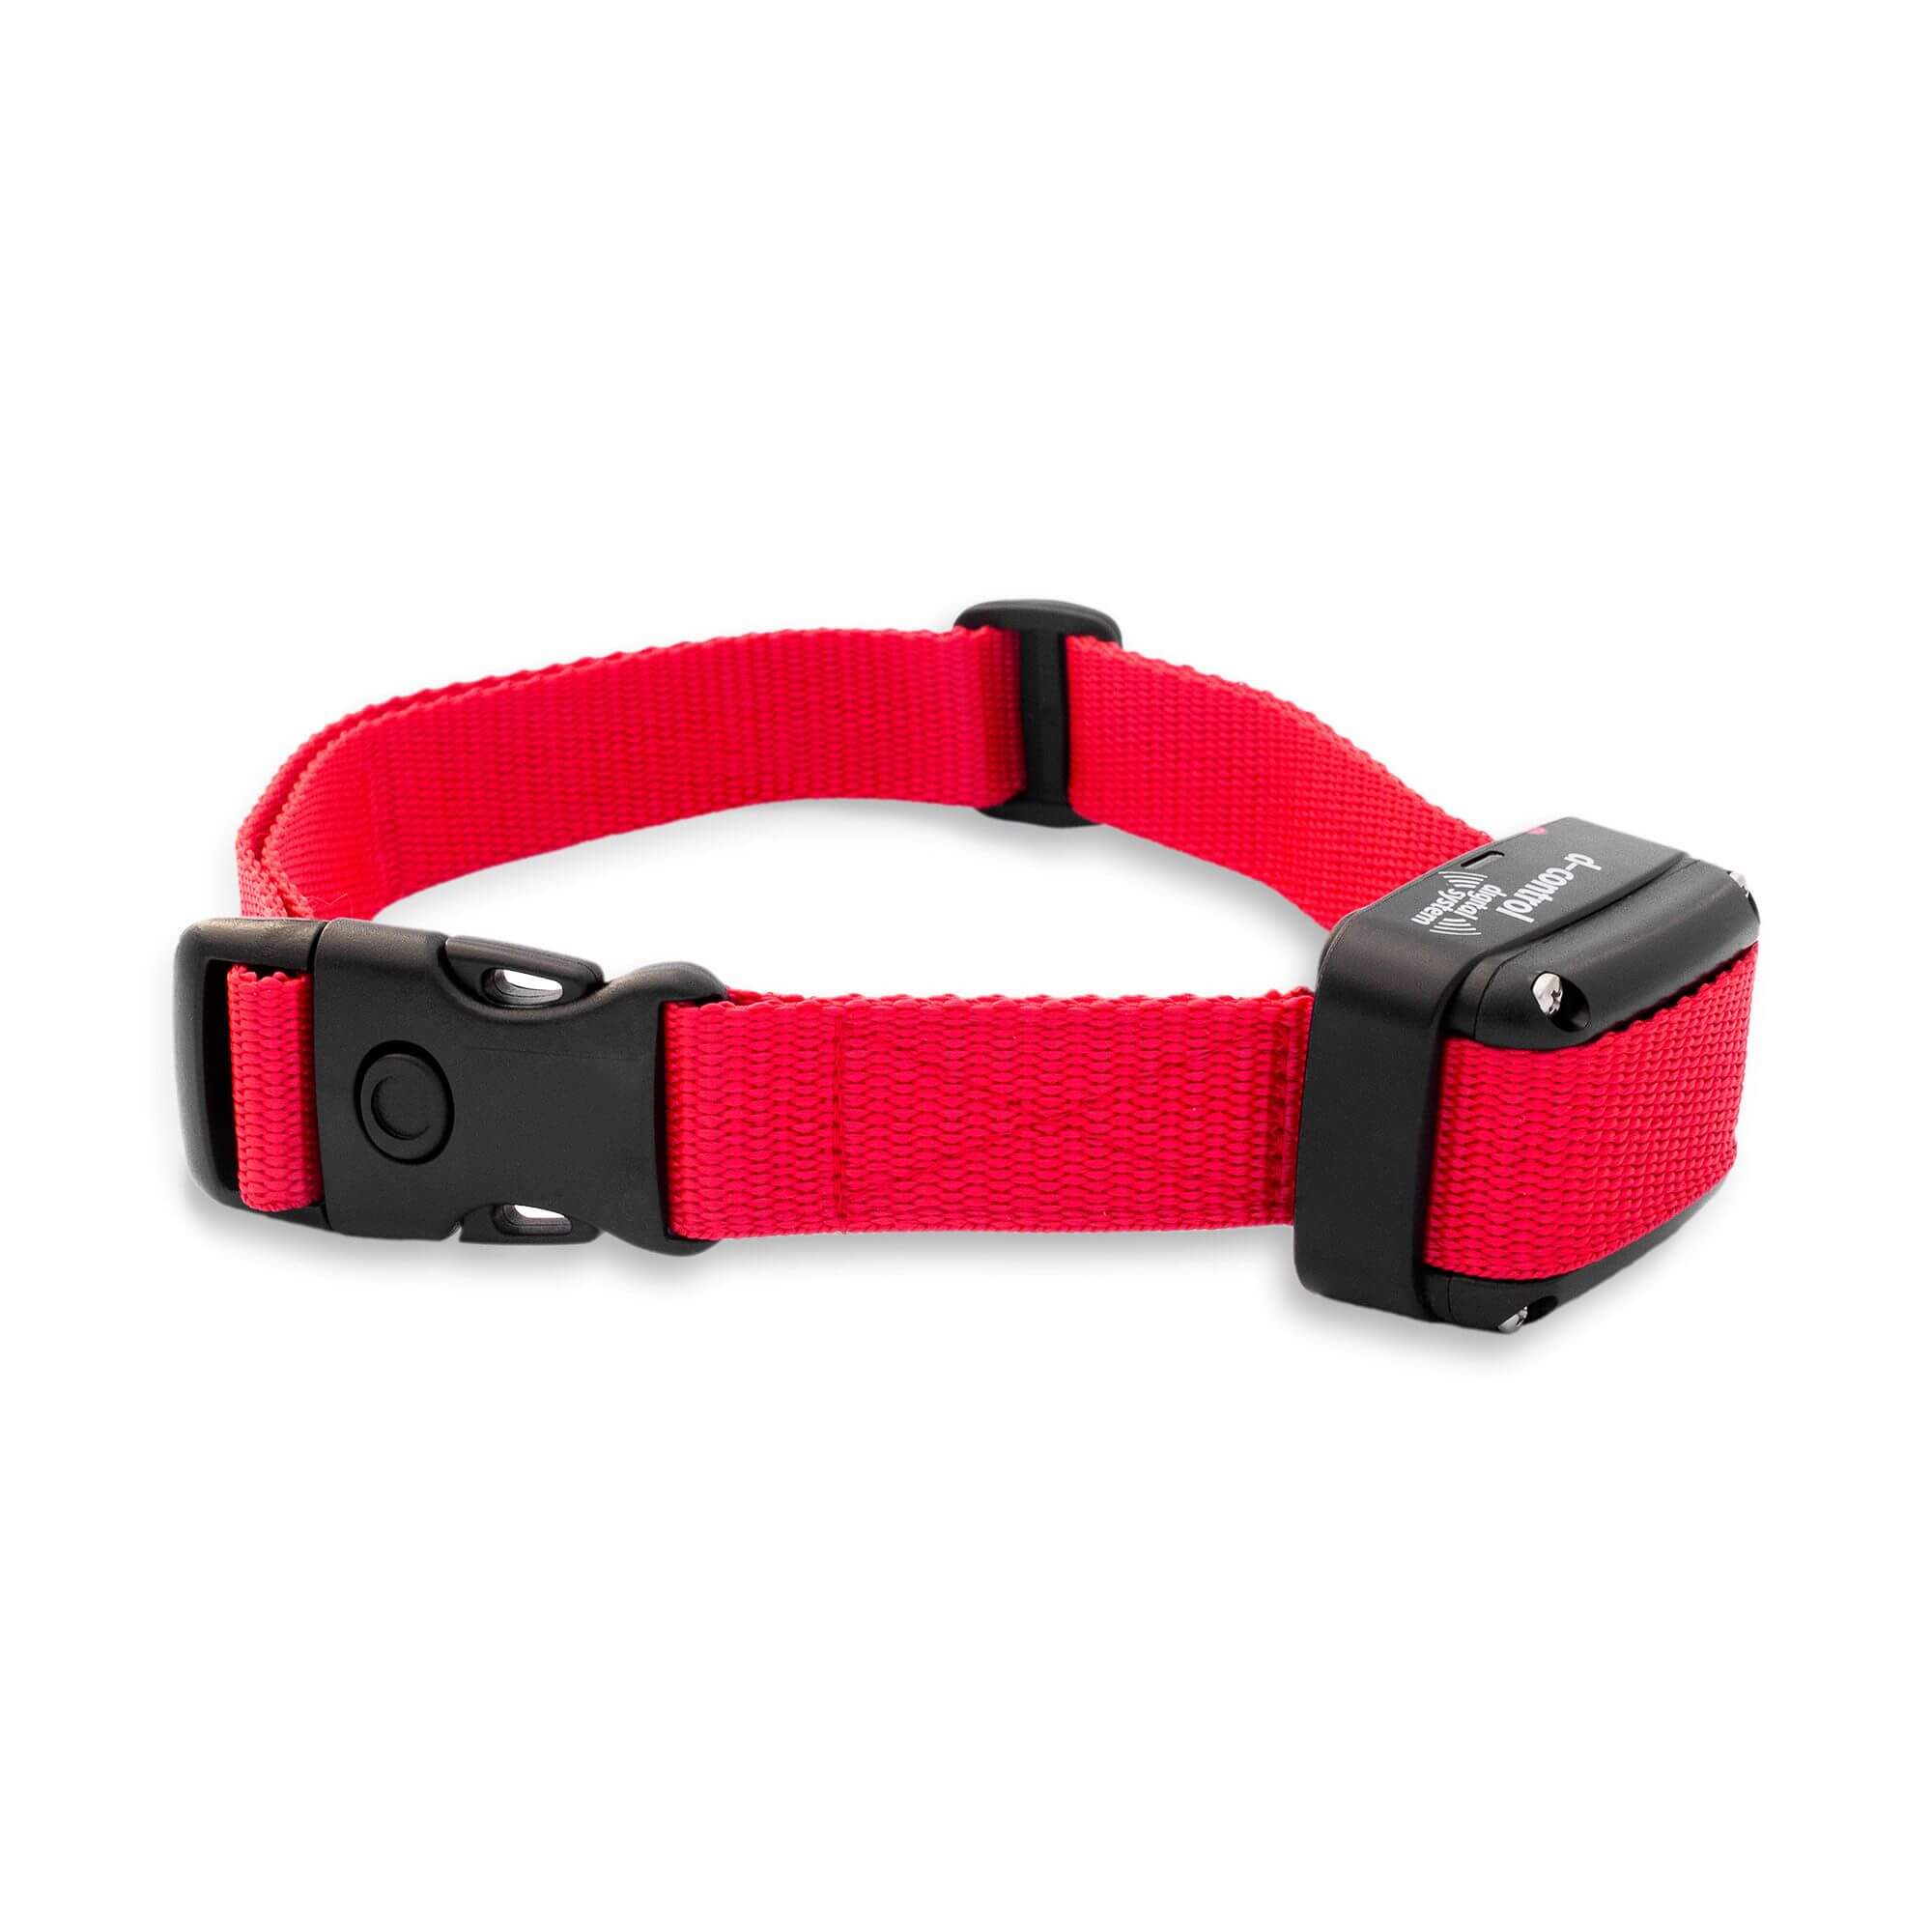 Training collar for another dog - receiver impulse + acoustic signal |  Dogtrace - Electronic trainning collars and dog equipment